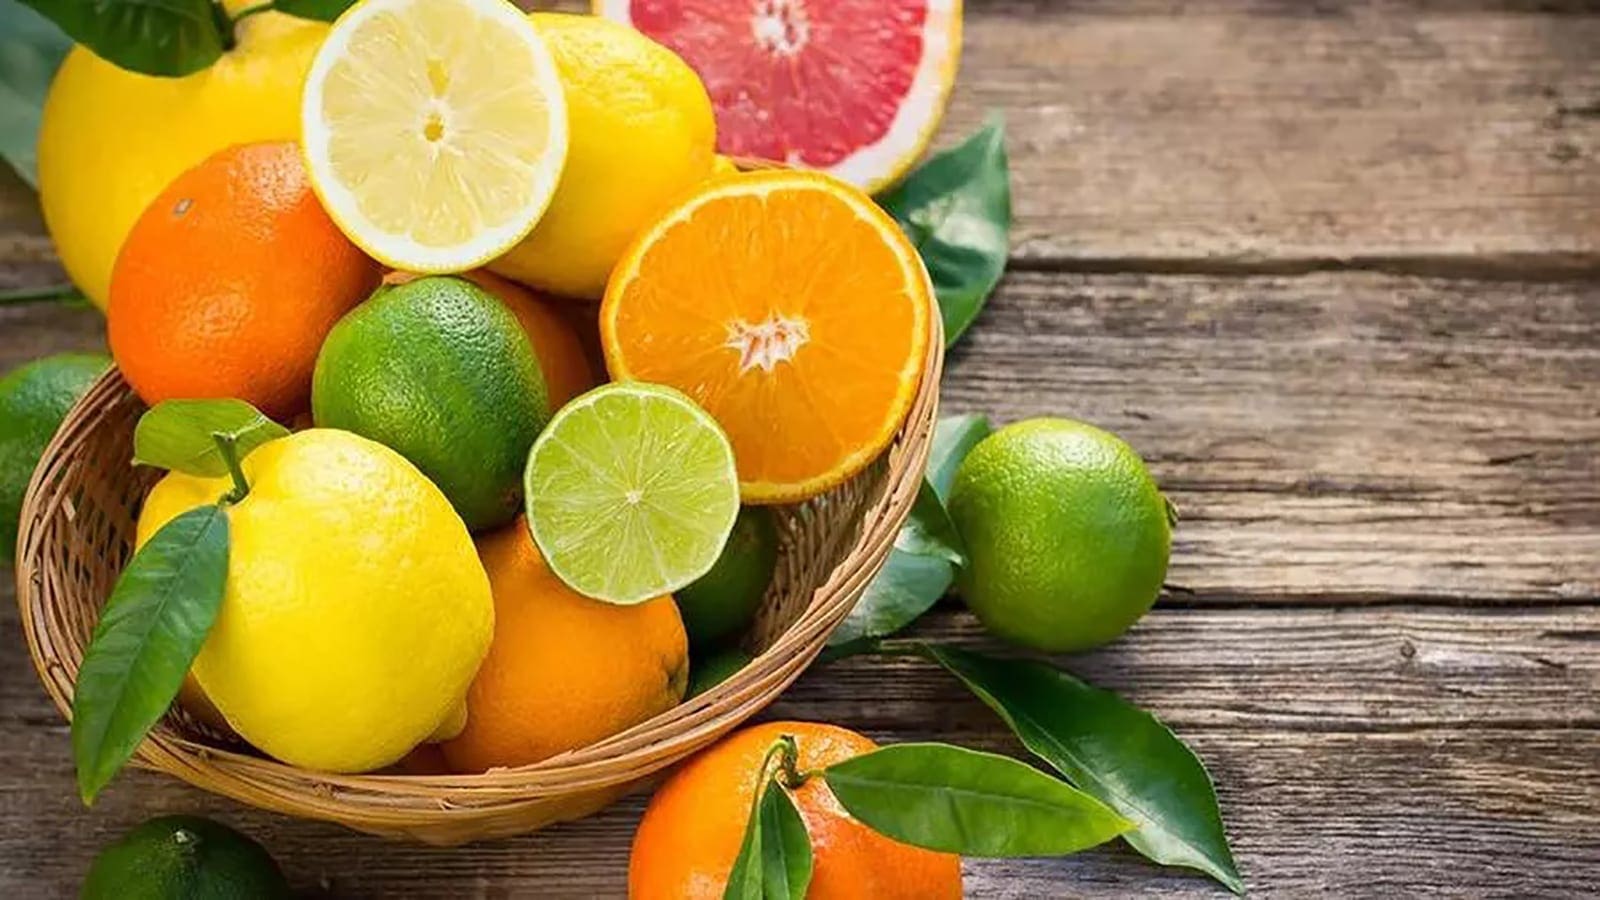 Morocco to register rise in citrus production by 12% following bullish performance across all categories